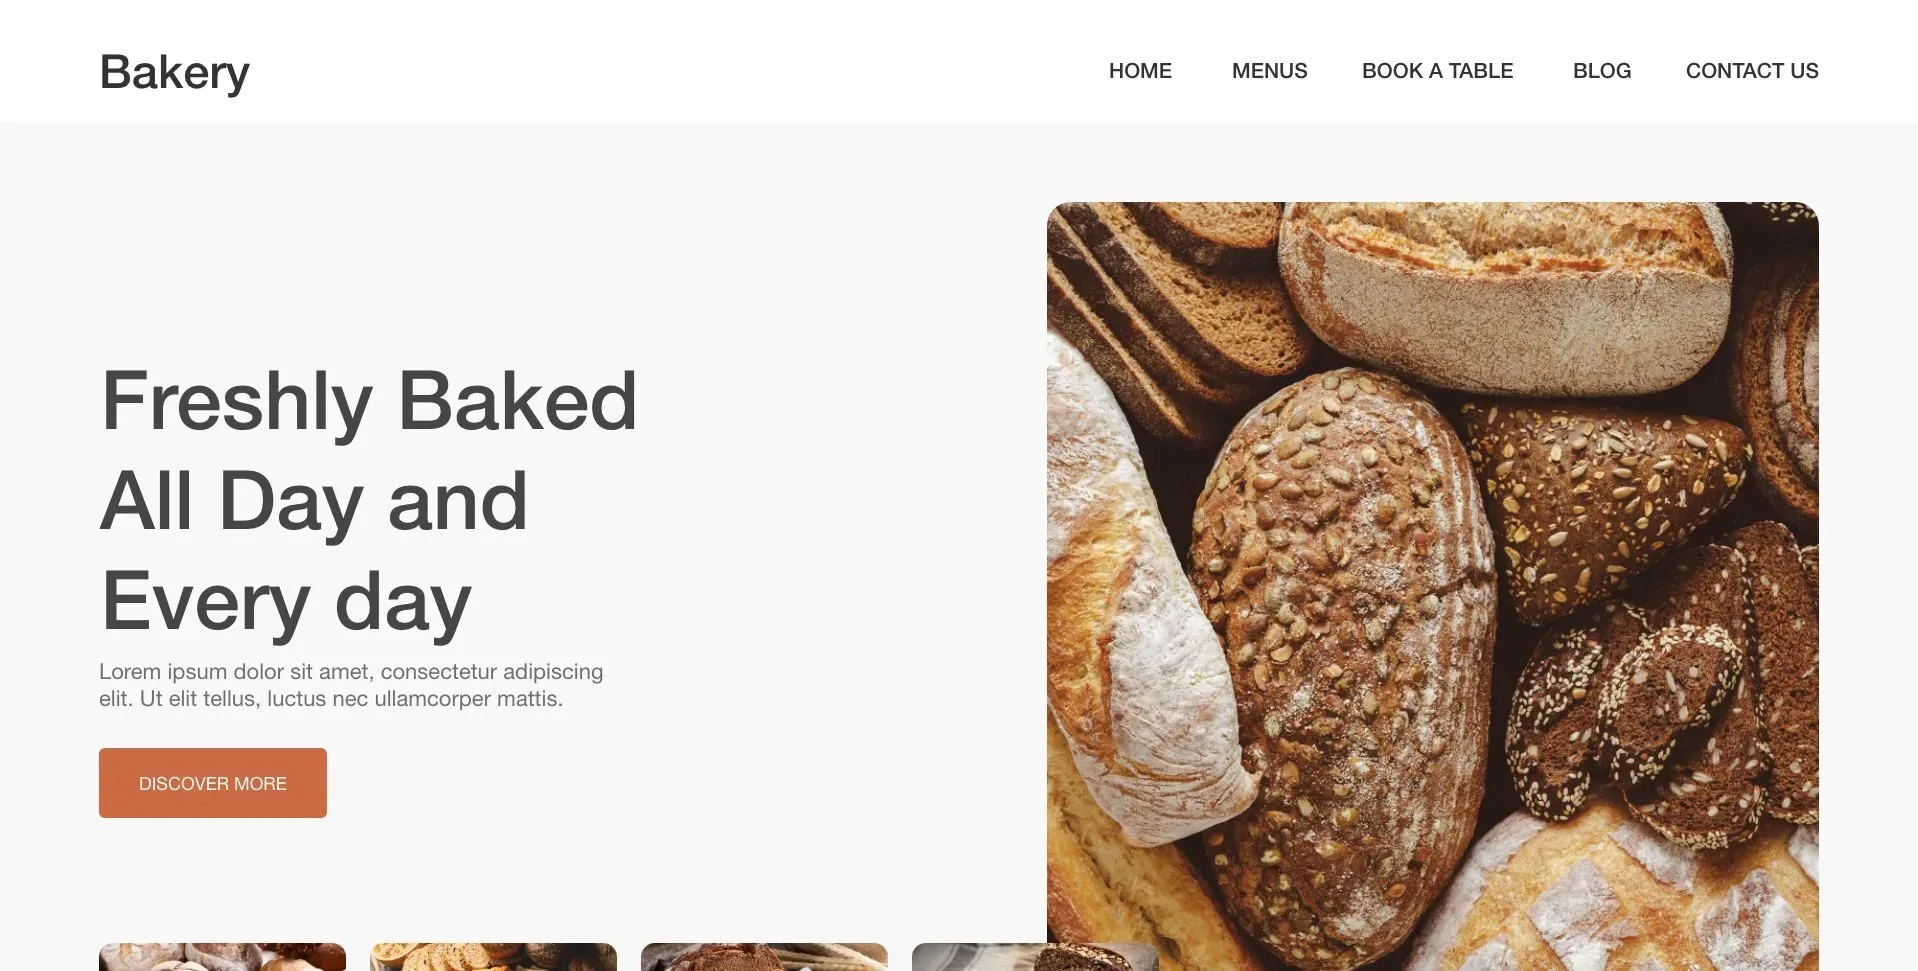 Bakery and Pastry Website Design